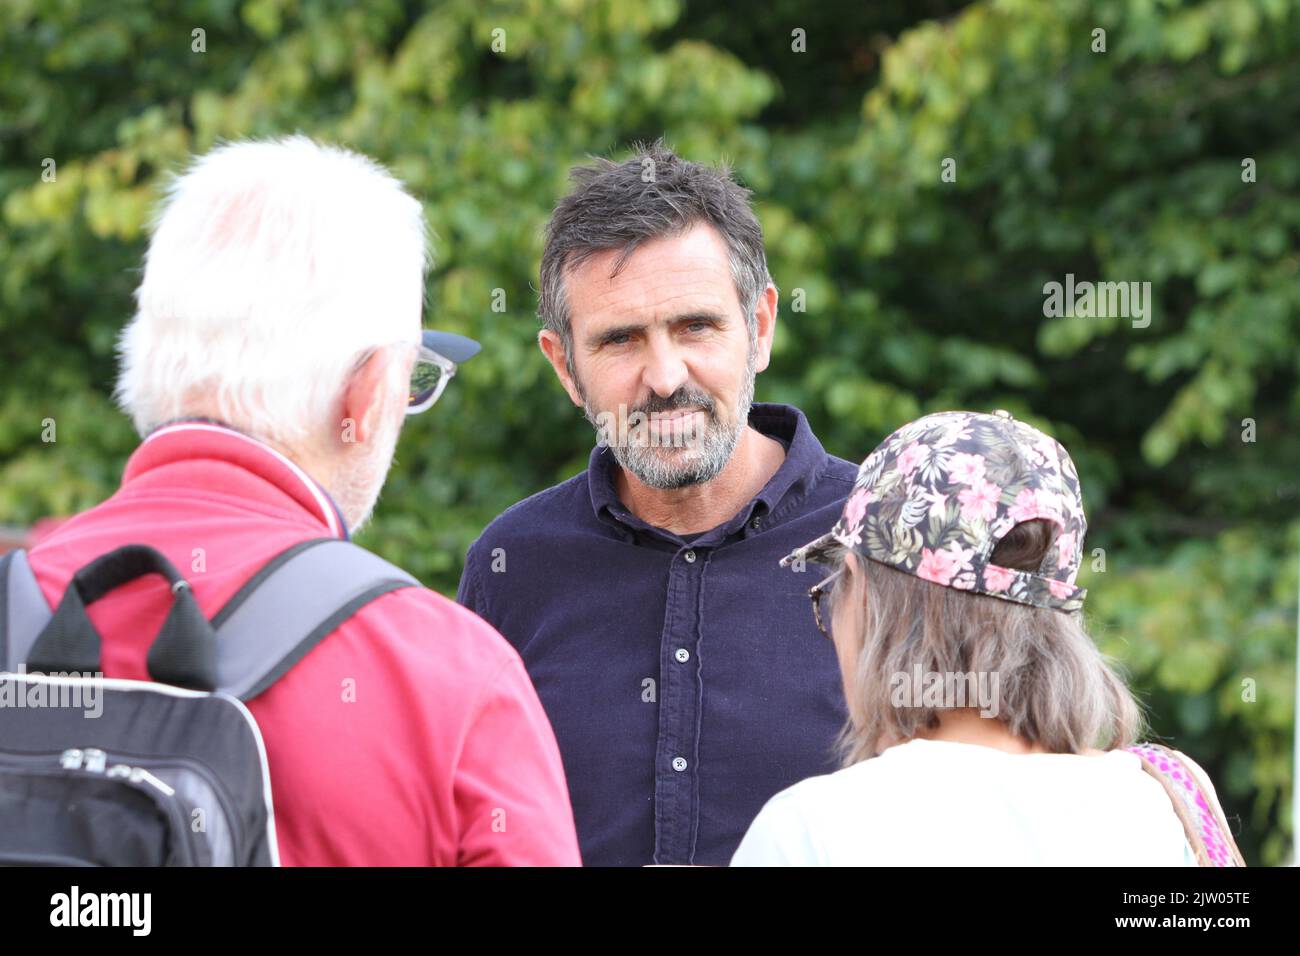 Saffron Walden, UK. 02nd Sep 2022. The first ever BBC Gardeners' World Autumn Fair is taking place at Audley End House in Essex. Adam Frost, one of the presenters of the BBC Gardeners' World programme, chatting with people. Credit: Eastern Views/Alamy Live News Stock Photo